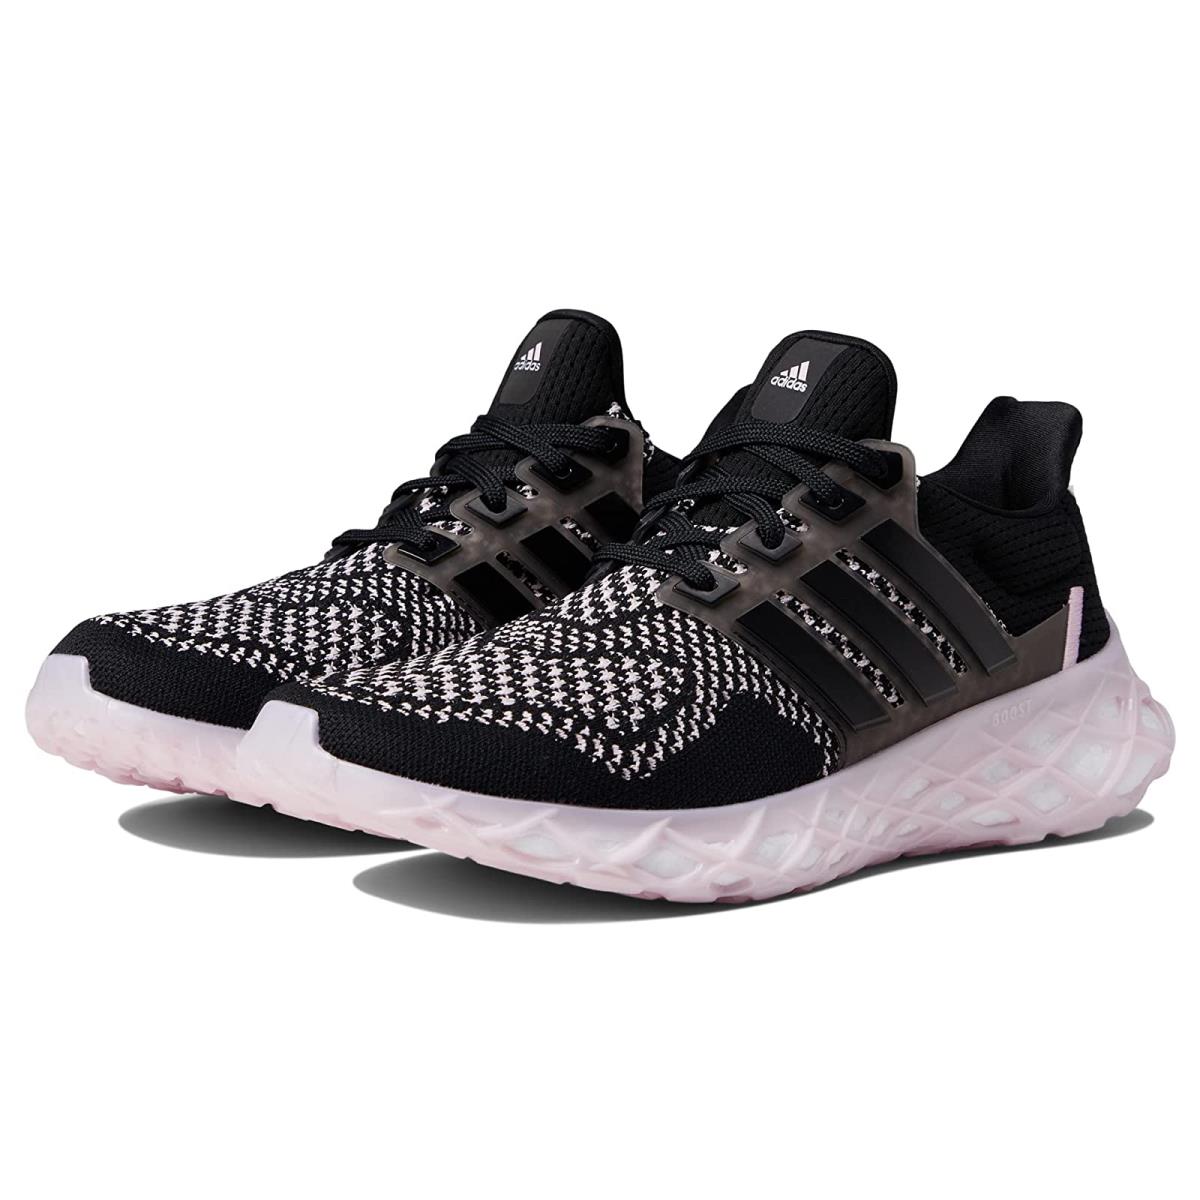 Woman`s Sneakers Athletic Shoes Adidas Running Ultraboost Web Alphaskin Black/Black/Clear Pink